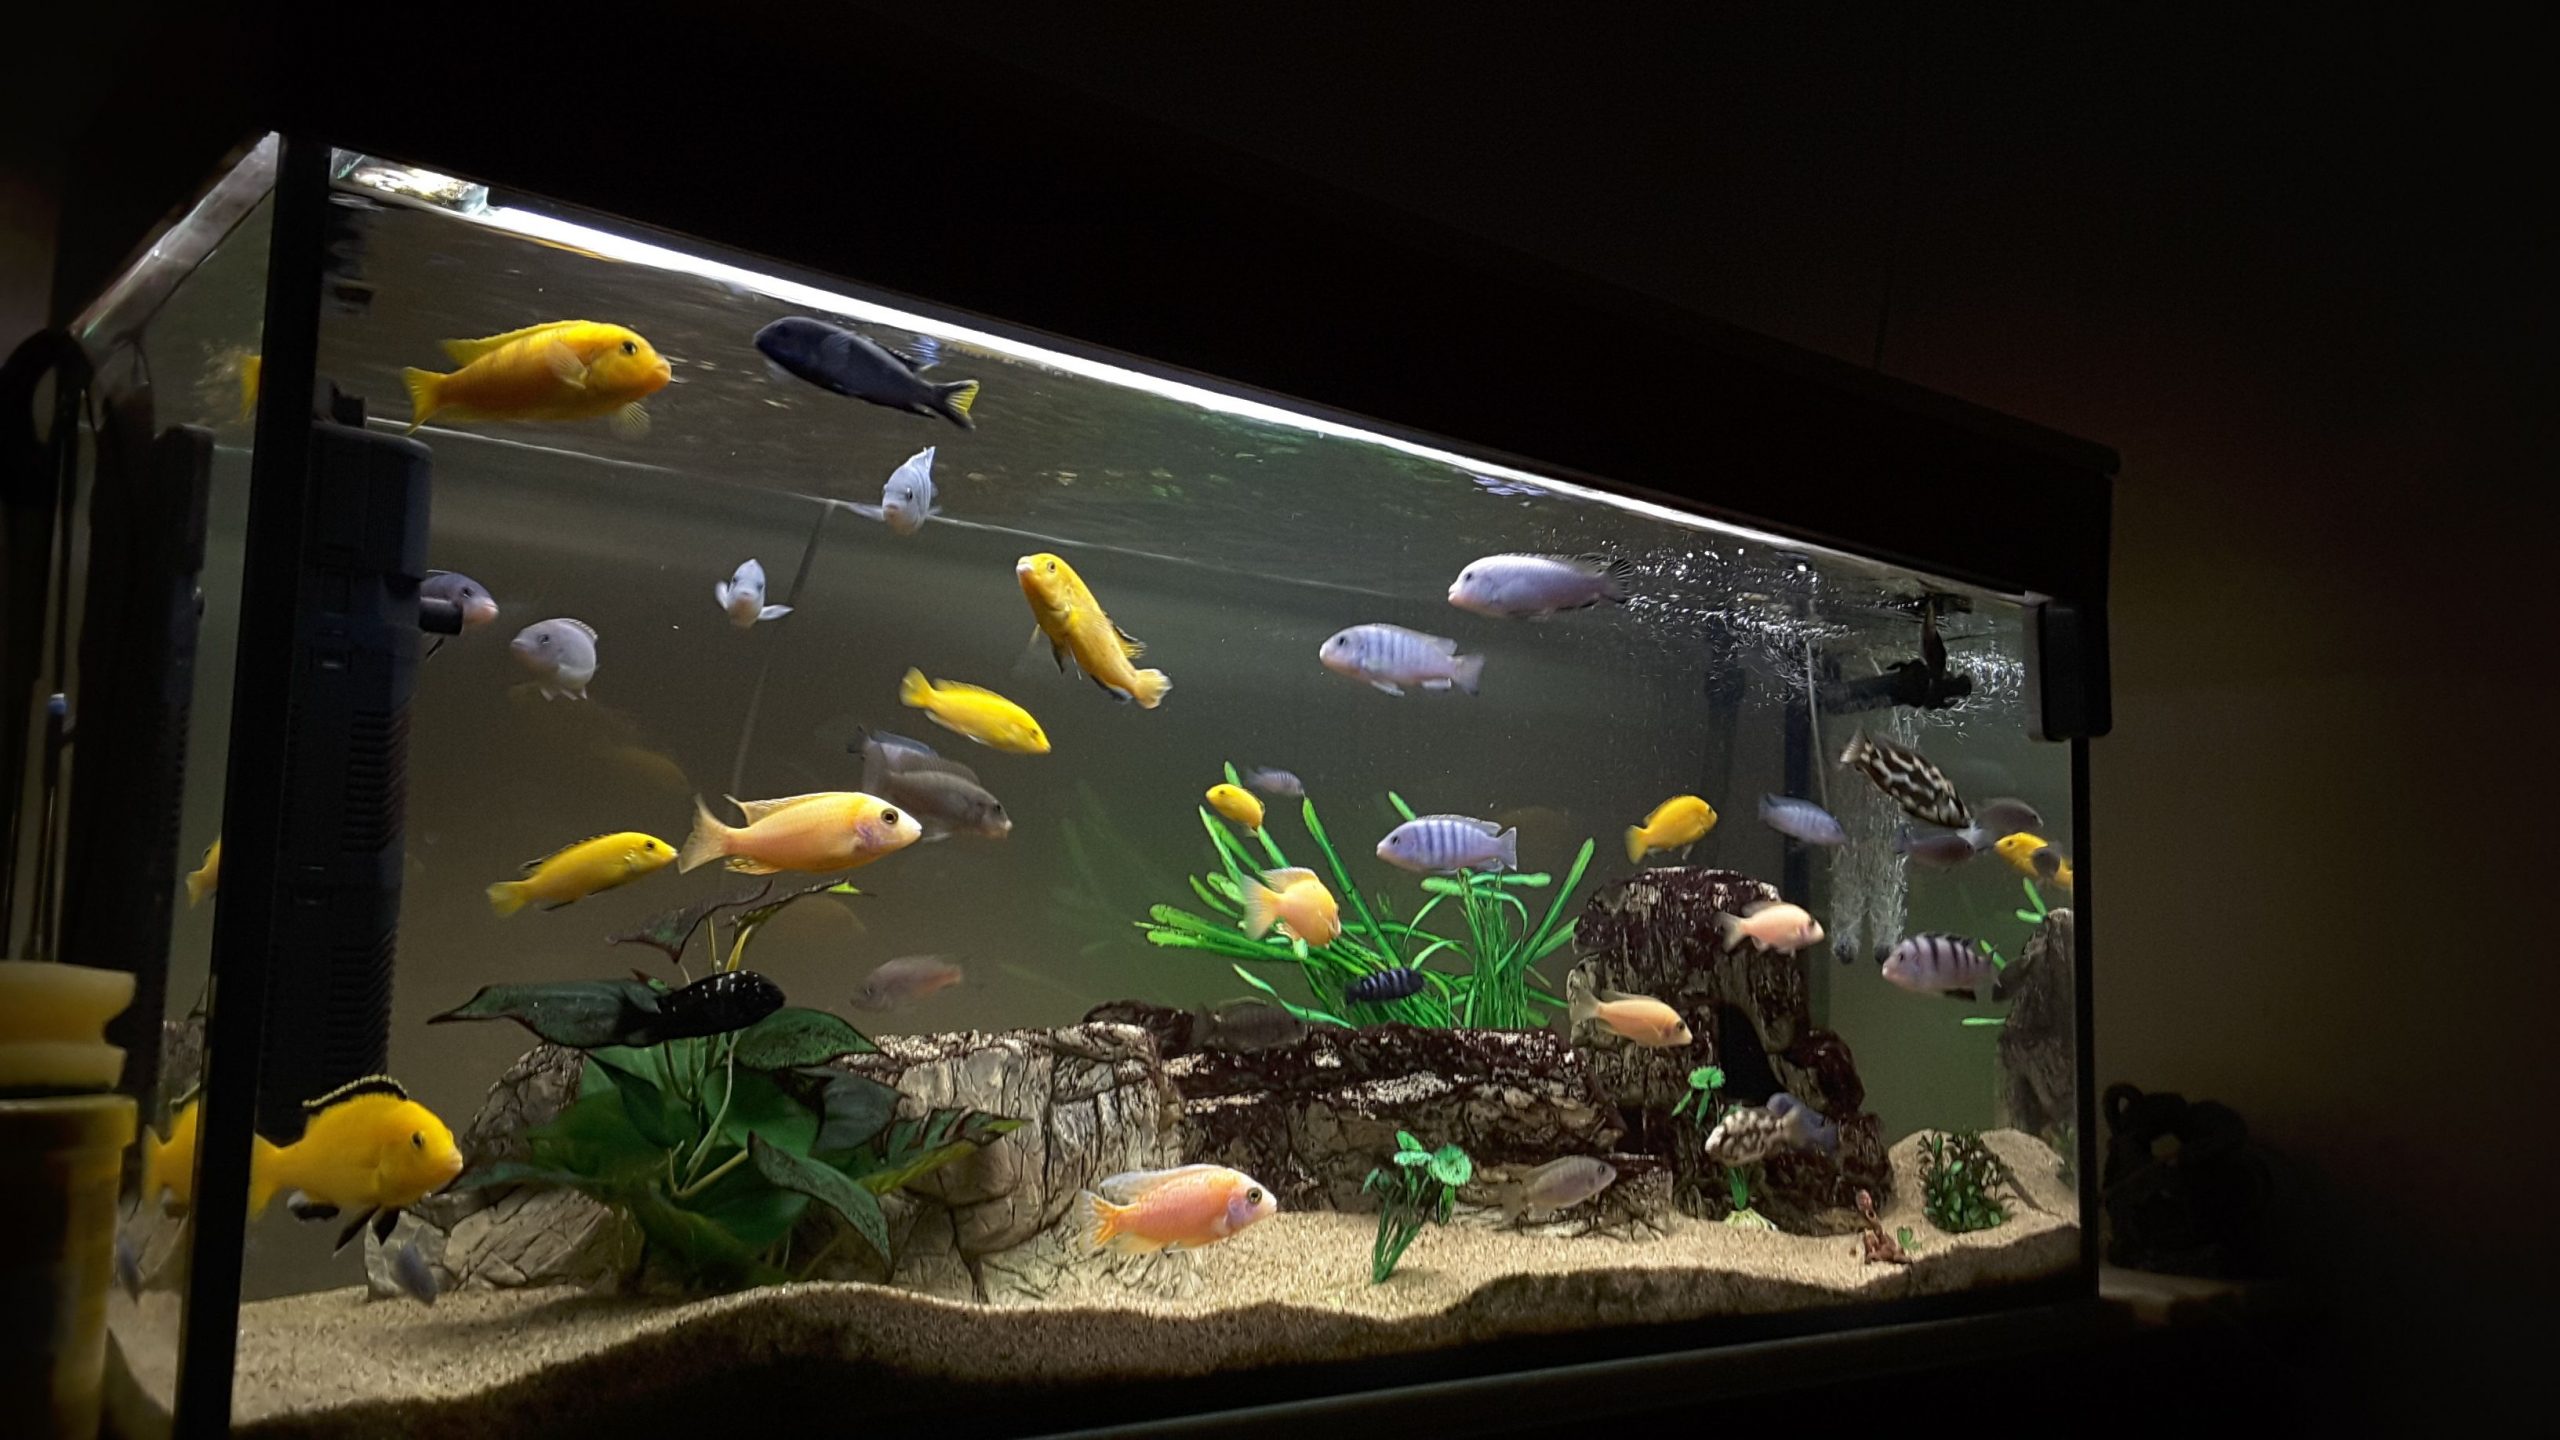 How to Take Care of Fish?